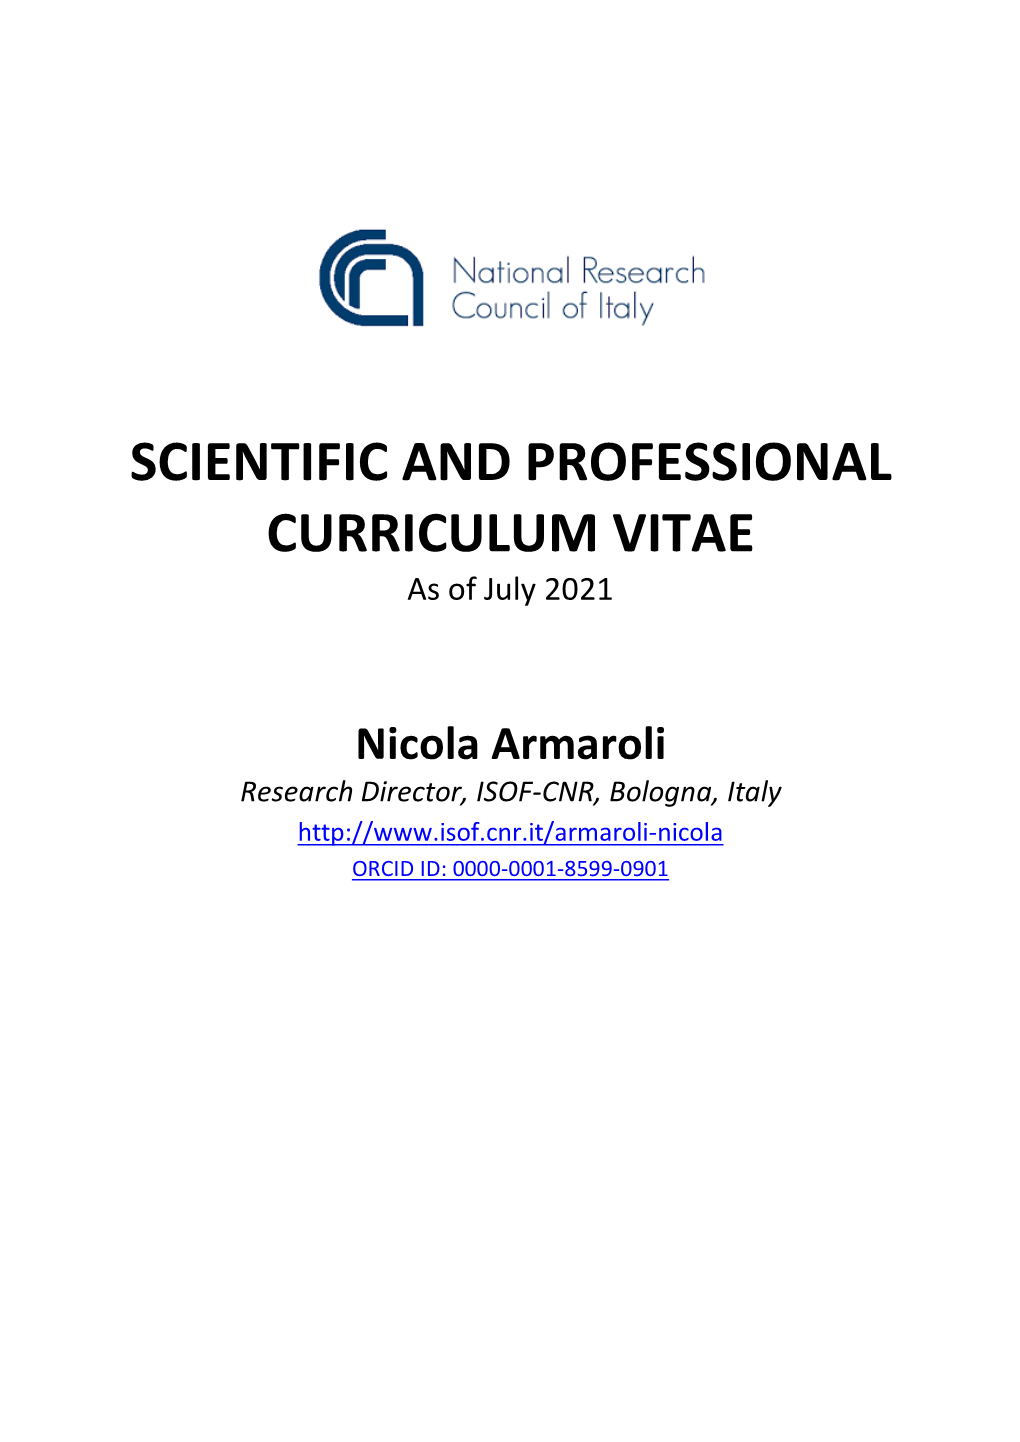 SCIENTIFIC and PROFESSIONAL CURRICULUM VITAE As of July 2021